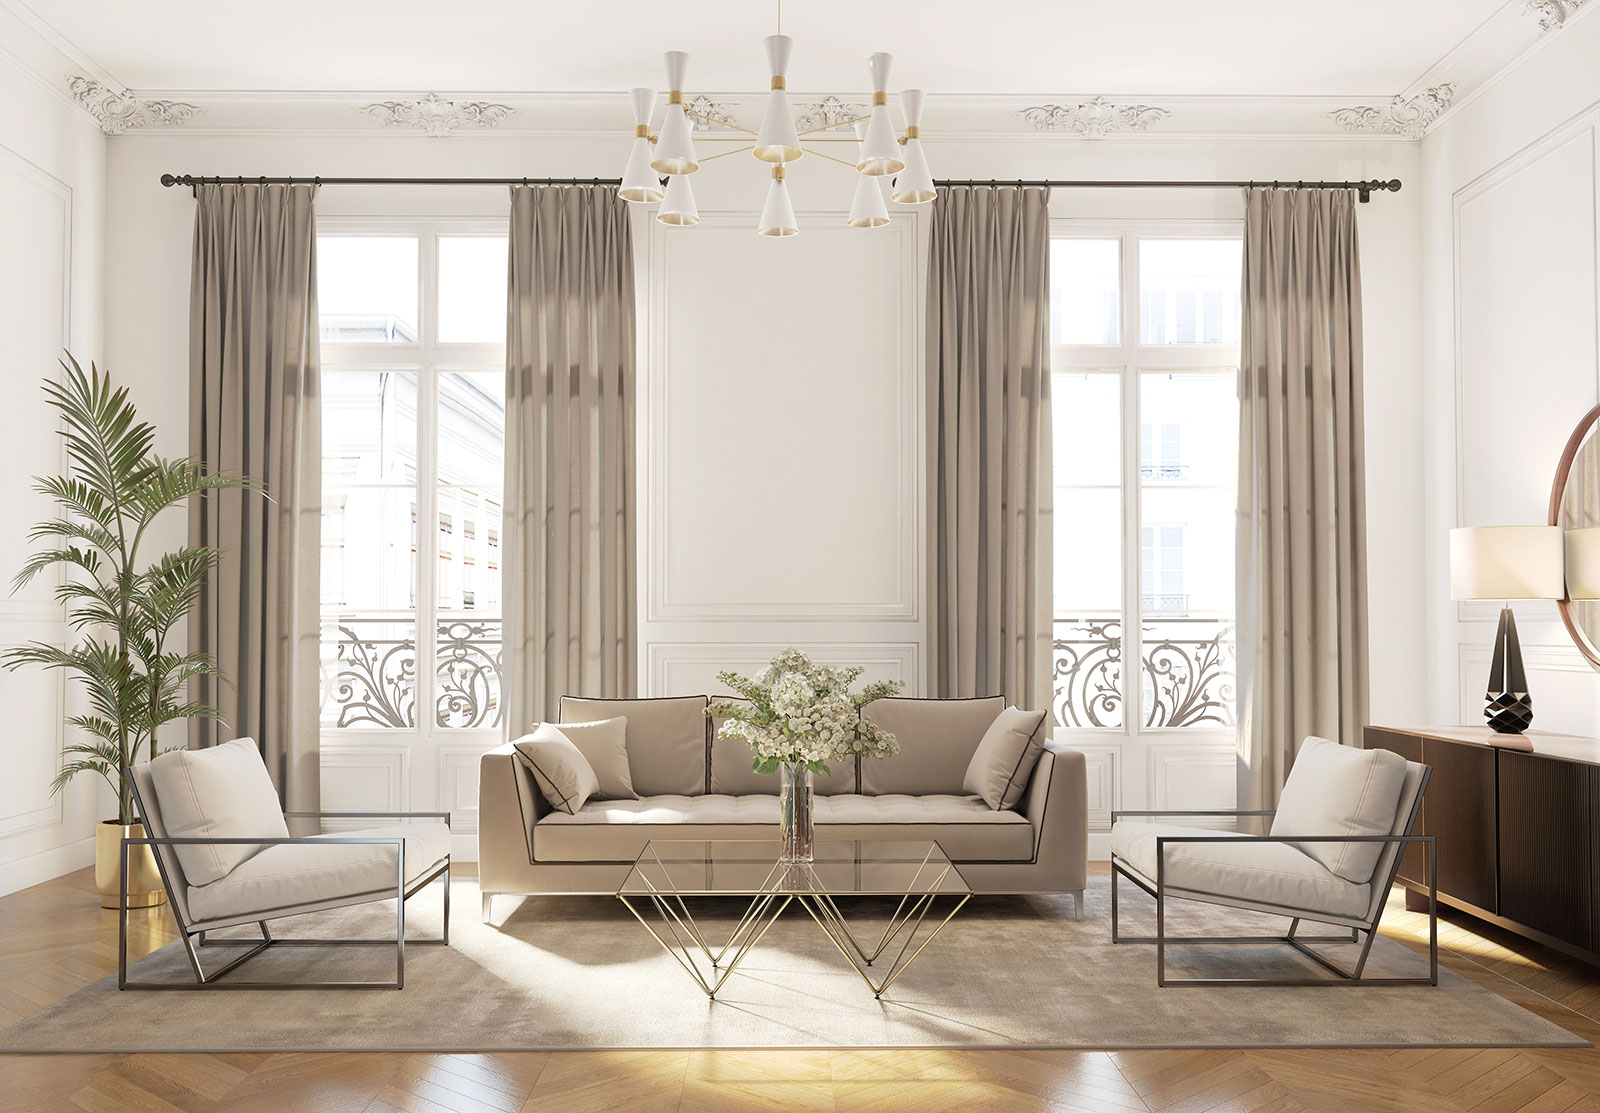 A White Themed Livingroom With Cream Color Curtains